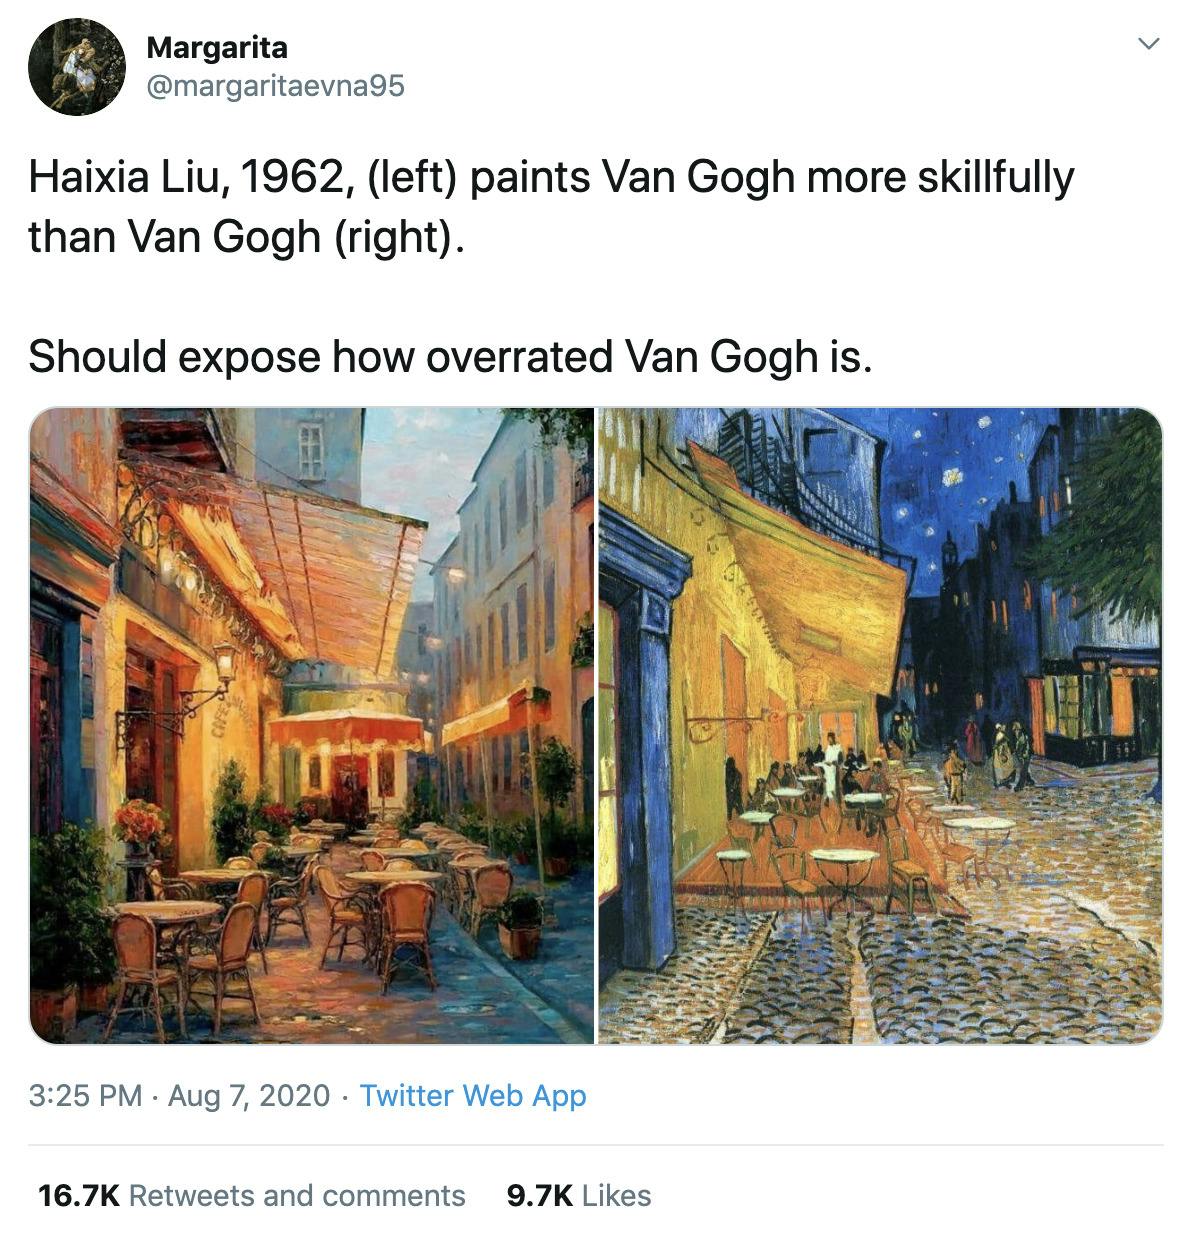 "Haixia Liu, 1962, (left) paints Van Gogh more skillfully than Van Gogh (right).  Should expose how overrated Van Gogh is." the two paintings side by side, both show a street cafe at night but one is more realistic and the other more abstract